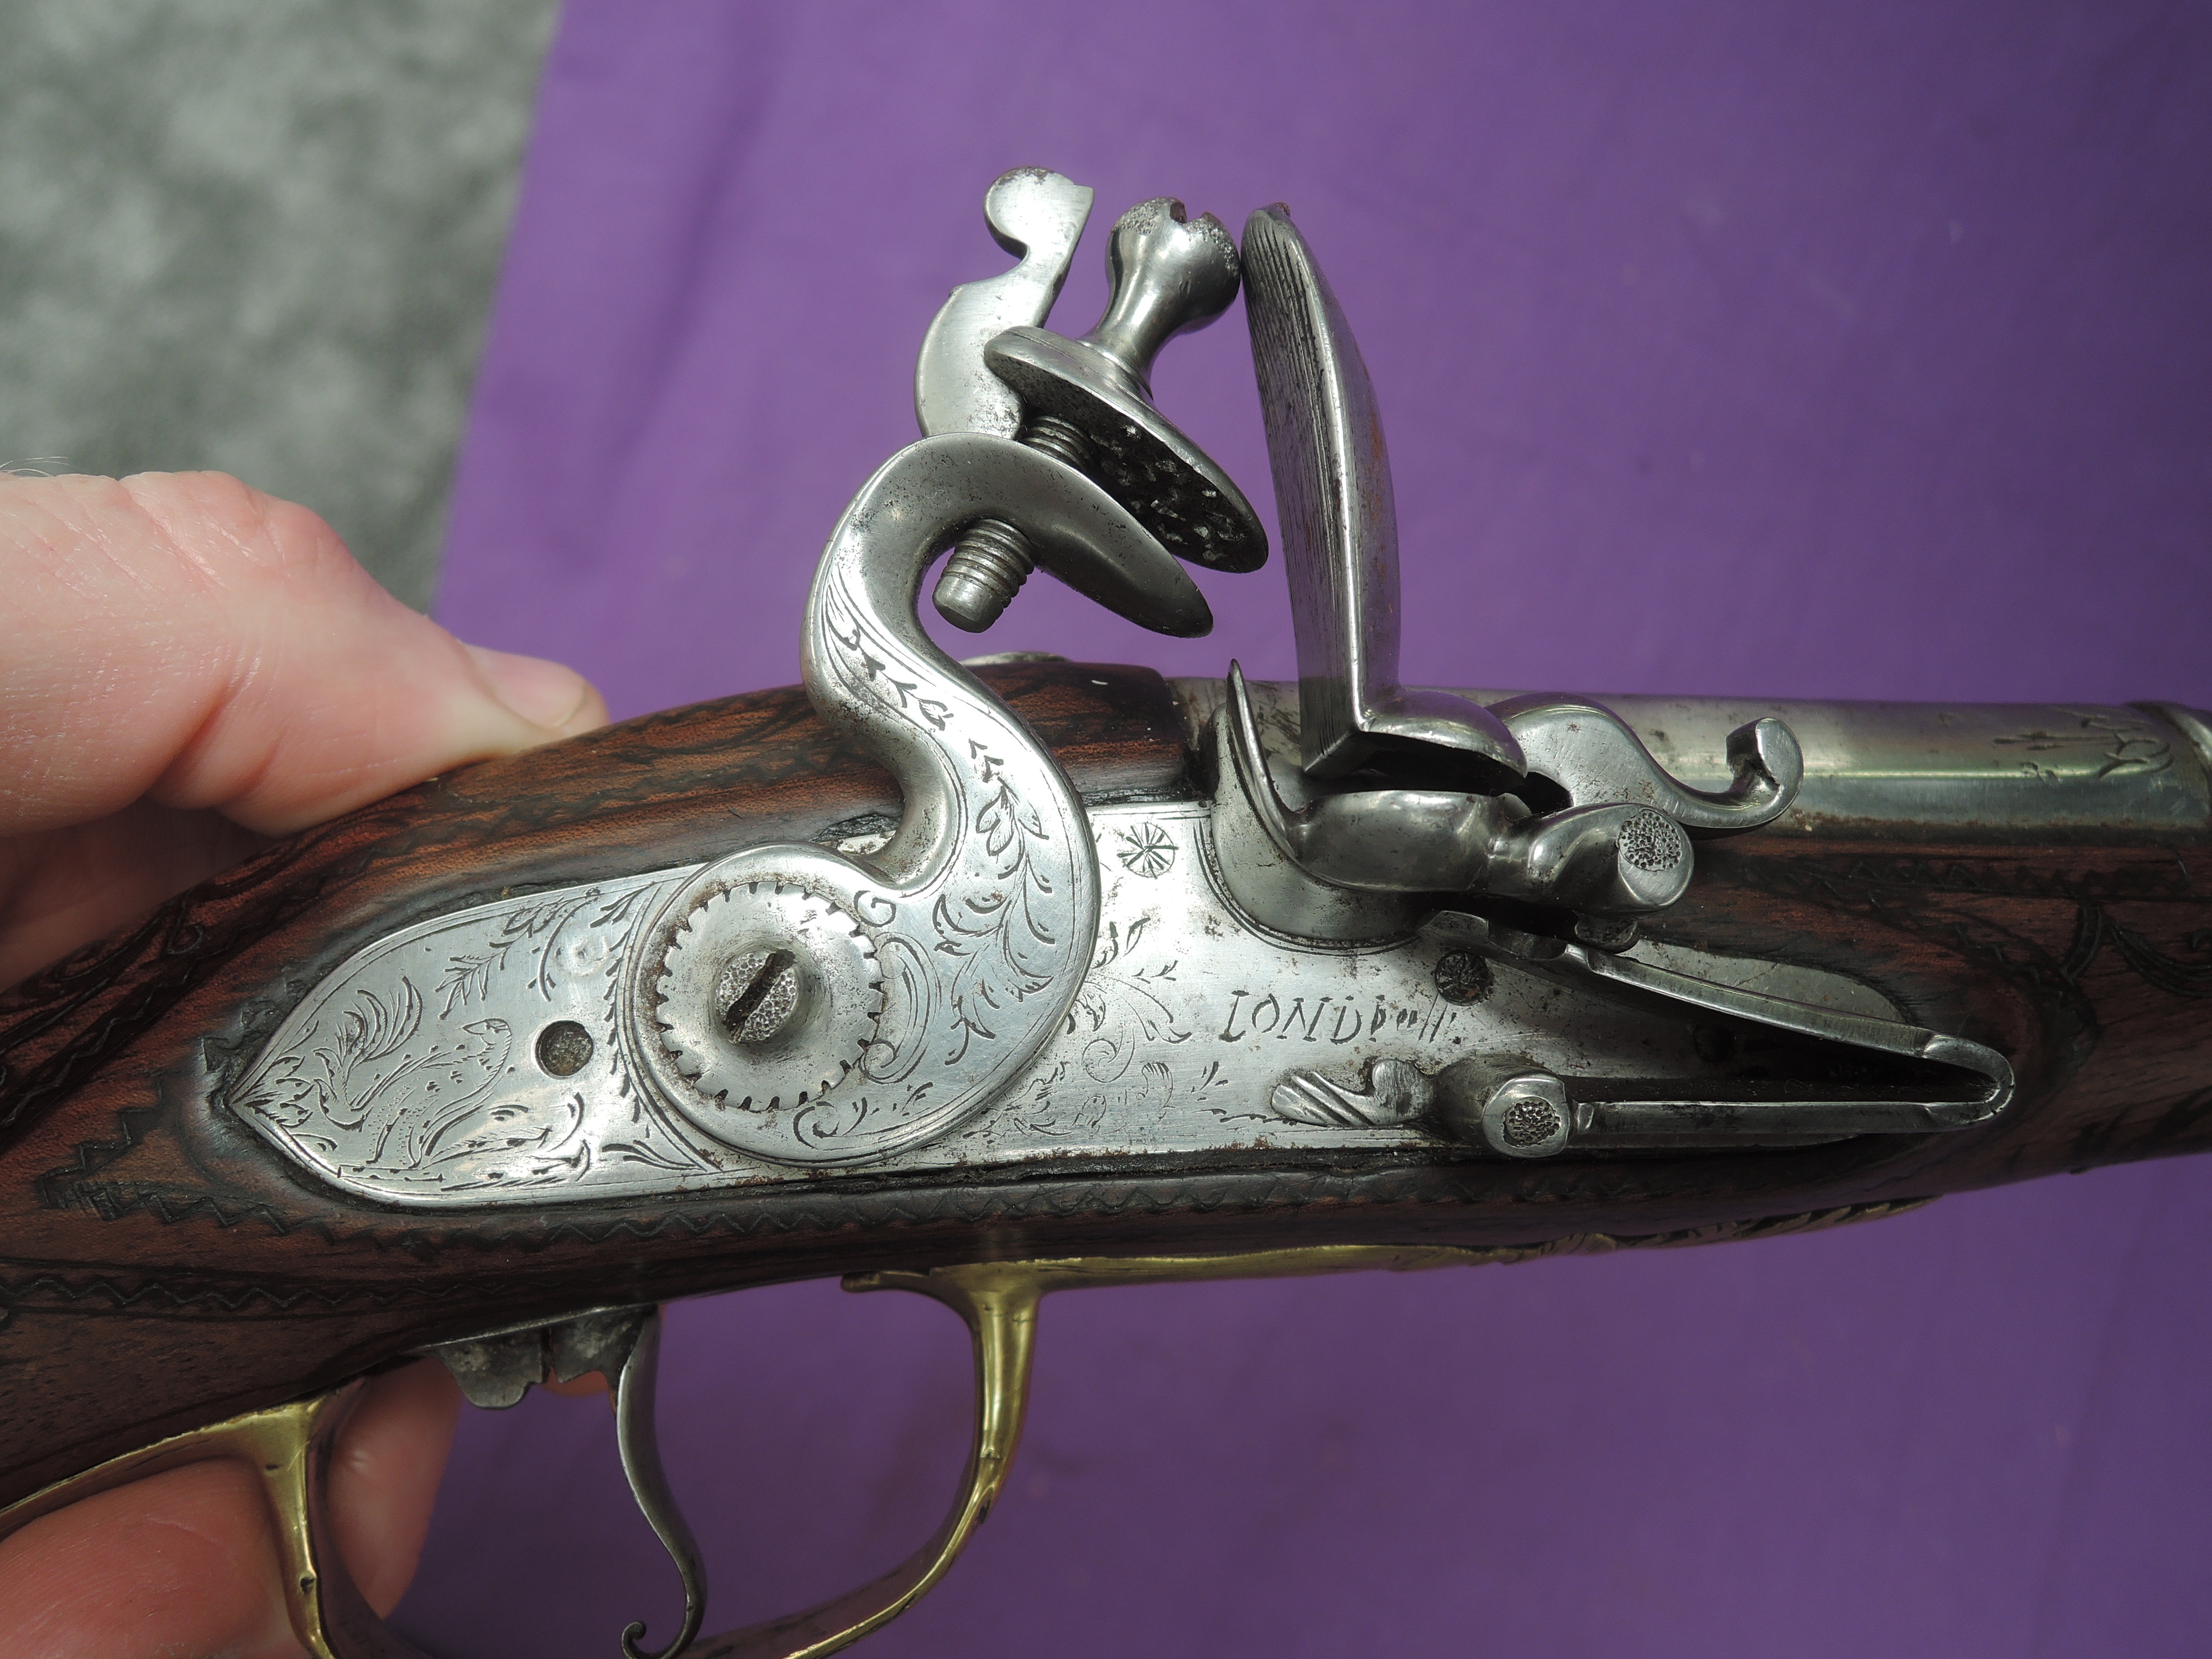 An early possibly Turkish Flintlock Blunderbuss Pistol, decorated brass trigger guard and stock - Image 8 of 8